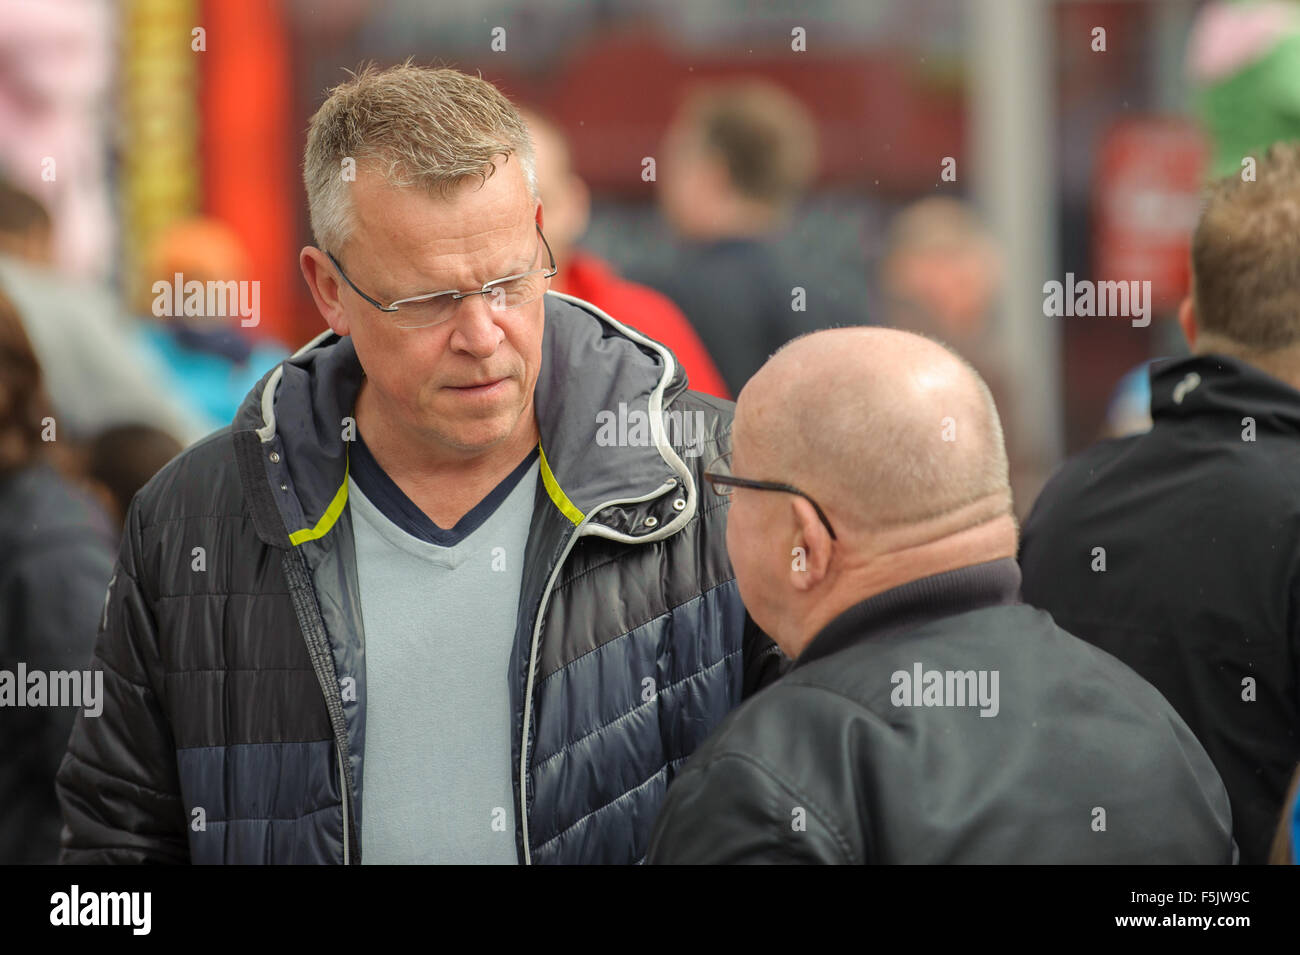 Chaiselong cirkulation Enumerate IFK Norrköping football coach Janne Andersson talks with locals in  Norrköping, Sweden Stock Photo - Alamy